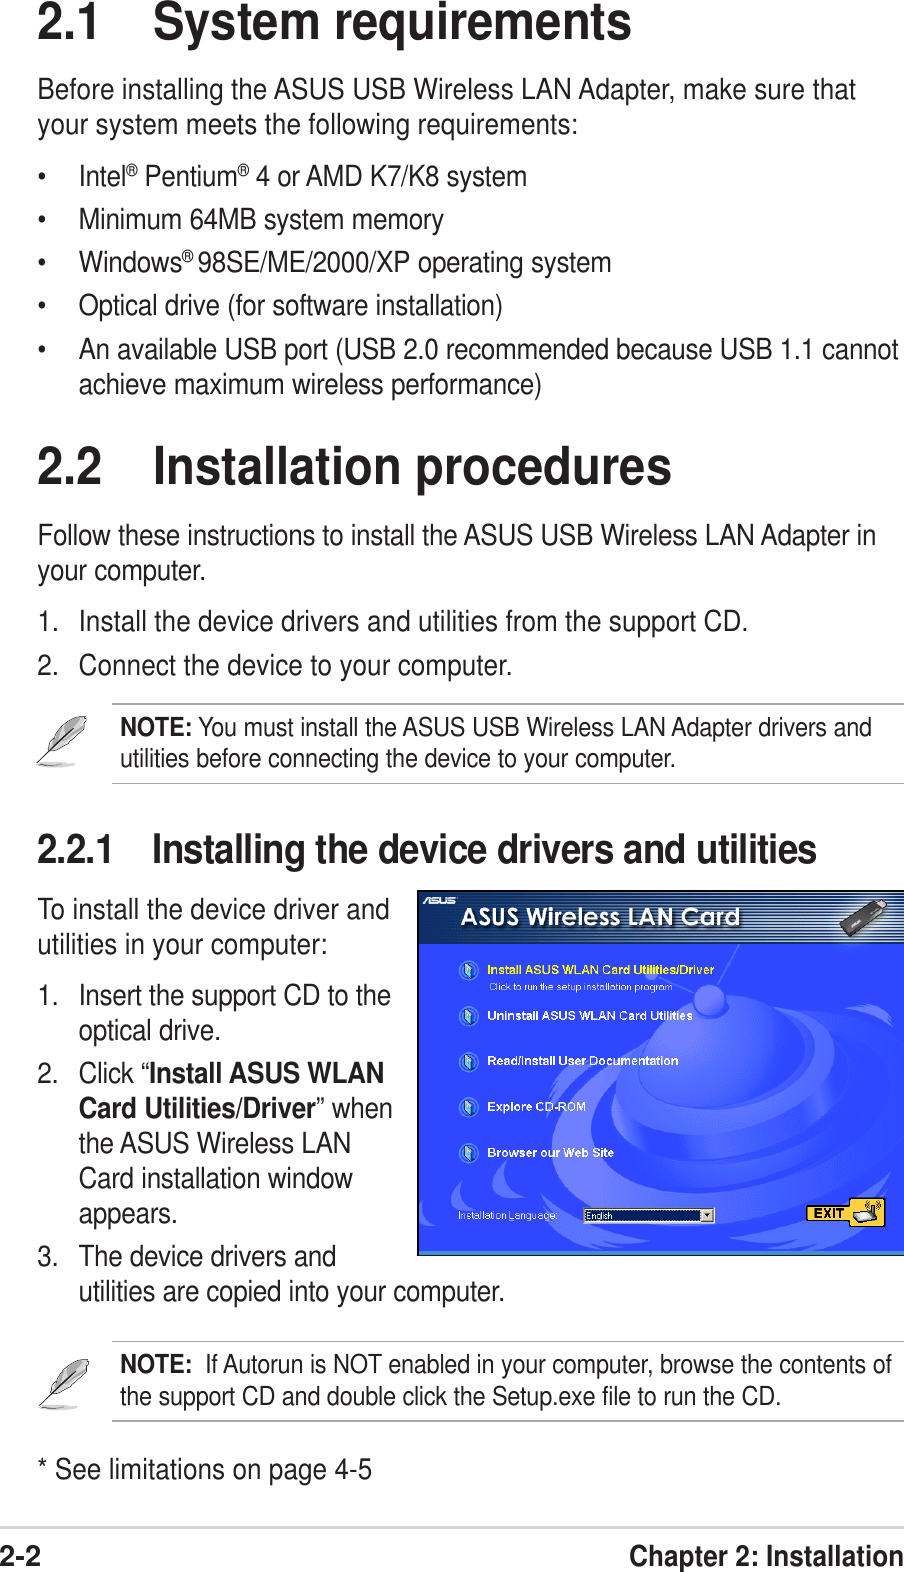 2-2Chapter 2: Installation2.1 System requirementsBefore installing the ASUS USB Wireless LAN Adapter, make sure thatyour system meets the following requirements:• Intel® Pentium® 4 or AMD K7/K8 system• Minimum 64MB system memory• Windows®98SE/ME/2000/XP operating system• Optical drive (for software installation)• An available USB port (USB 2.0 recommended because USB 1.1 cannotachieve maximum wireless performance)2.2.1 Installing the device drivers and utilitiesTo install the device driver andutilities in your computer:1. Insert the support CD to theoptical drive.2. Click “Install ASUS WLANCard Utilities/Driver” whenthe ASUS Wireless LANCard installation windowappears.3. The device drivers andutilities are copied into your computer.NOTE:  If Autorun is NOT enabled in your computer, browse the contents ofthe support CD and double click the Setup.exe file to run the CD.2.2 Installation proceduresFollow these instructions to install the ASUS USB Wireless LAN Adapter inyour computer.1. Install the device drivers and utilities from the support CD.2. Connect the device to your computer.NOTE: You must install the ASUS USB Wireless LAN Adapter drivers andutilities before connecting the device to your computer.* See limitations on page 4-5